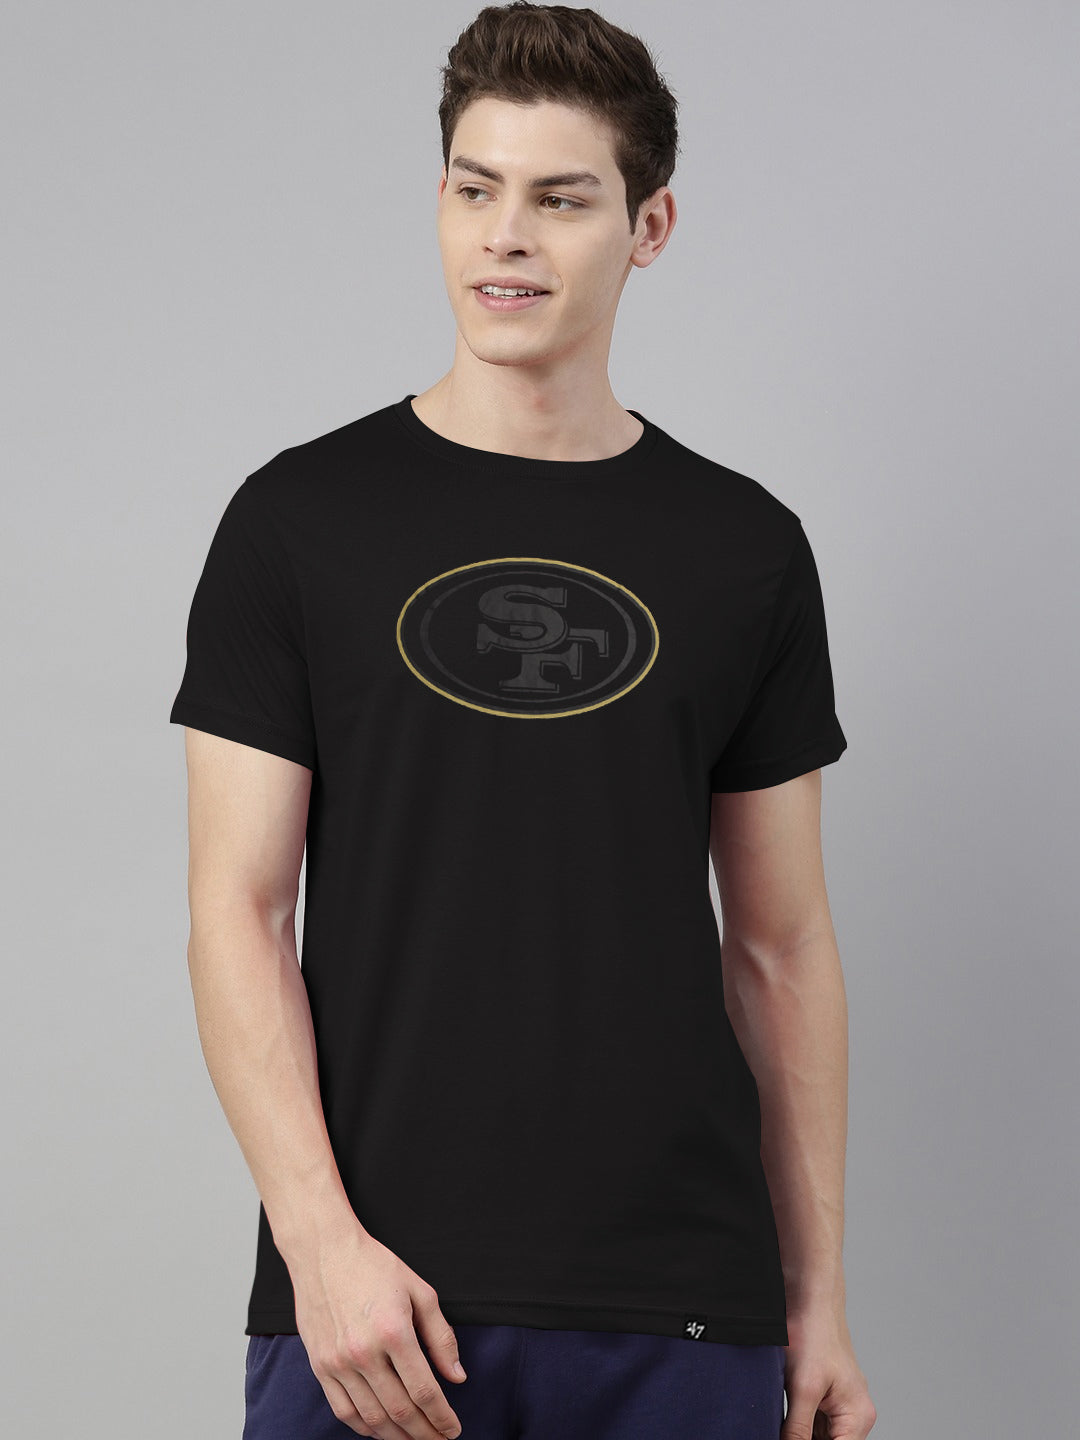 47 Crew Neck Half Sleeve Tee Shirt For Men-Black with Print-BE1120